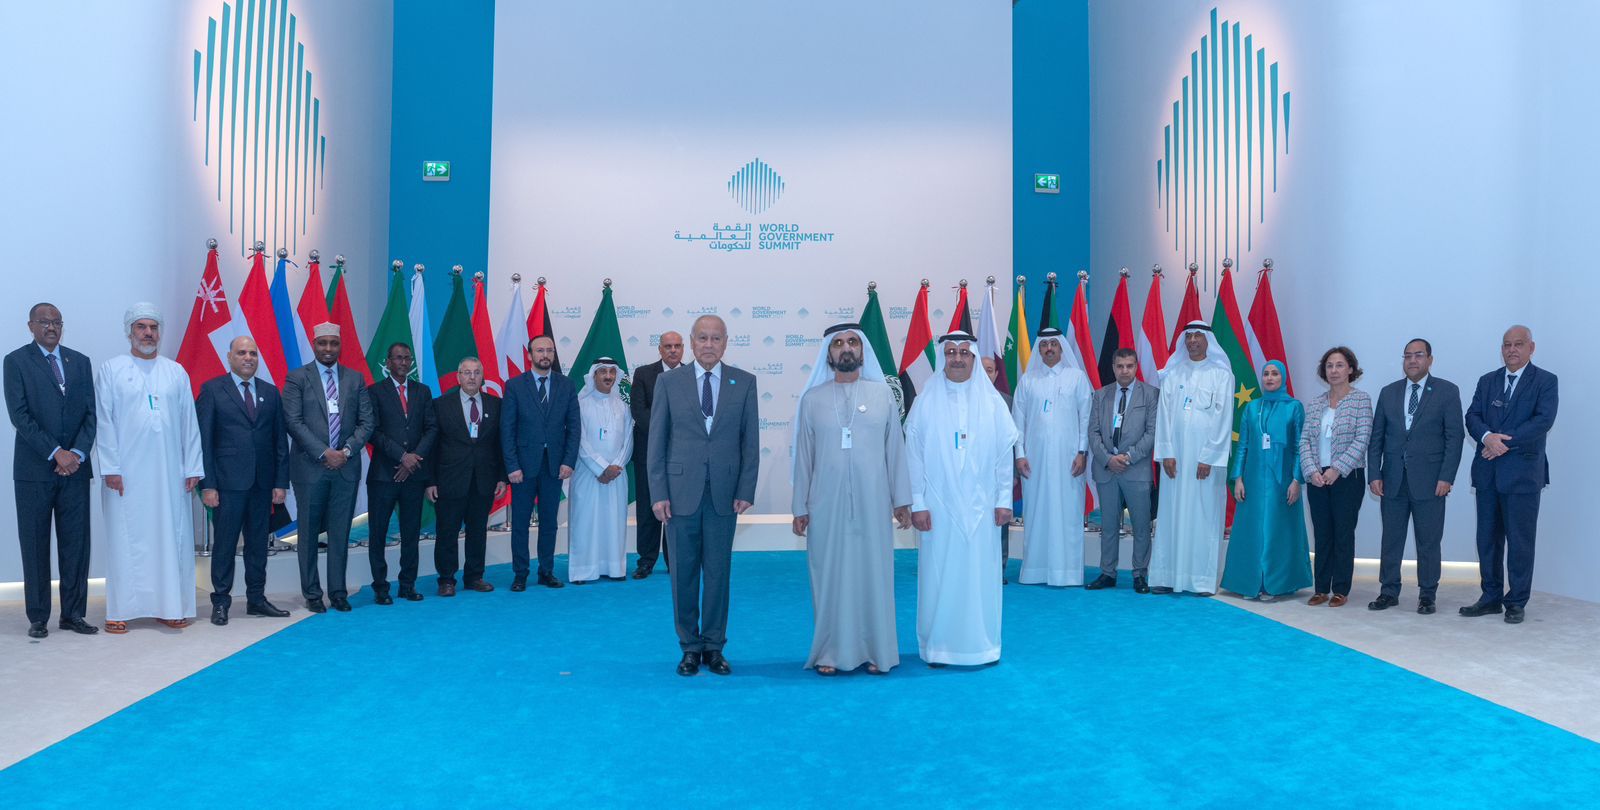 You are currently viewing The conclusion of the Arab Government Management Forum in Dubai